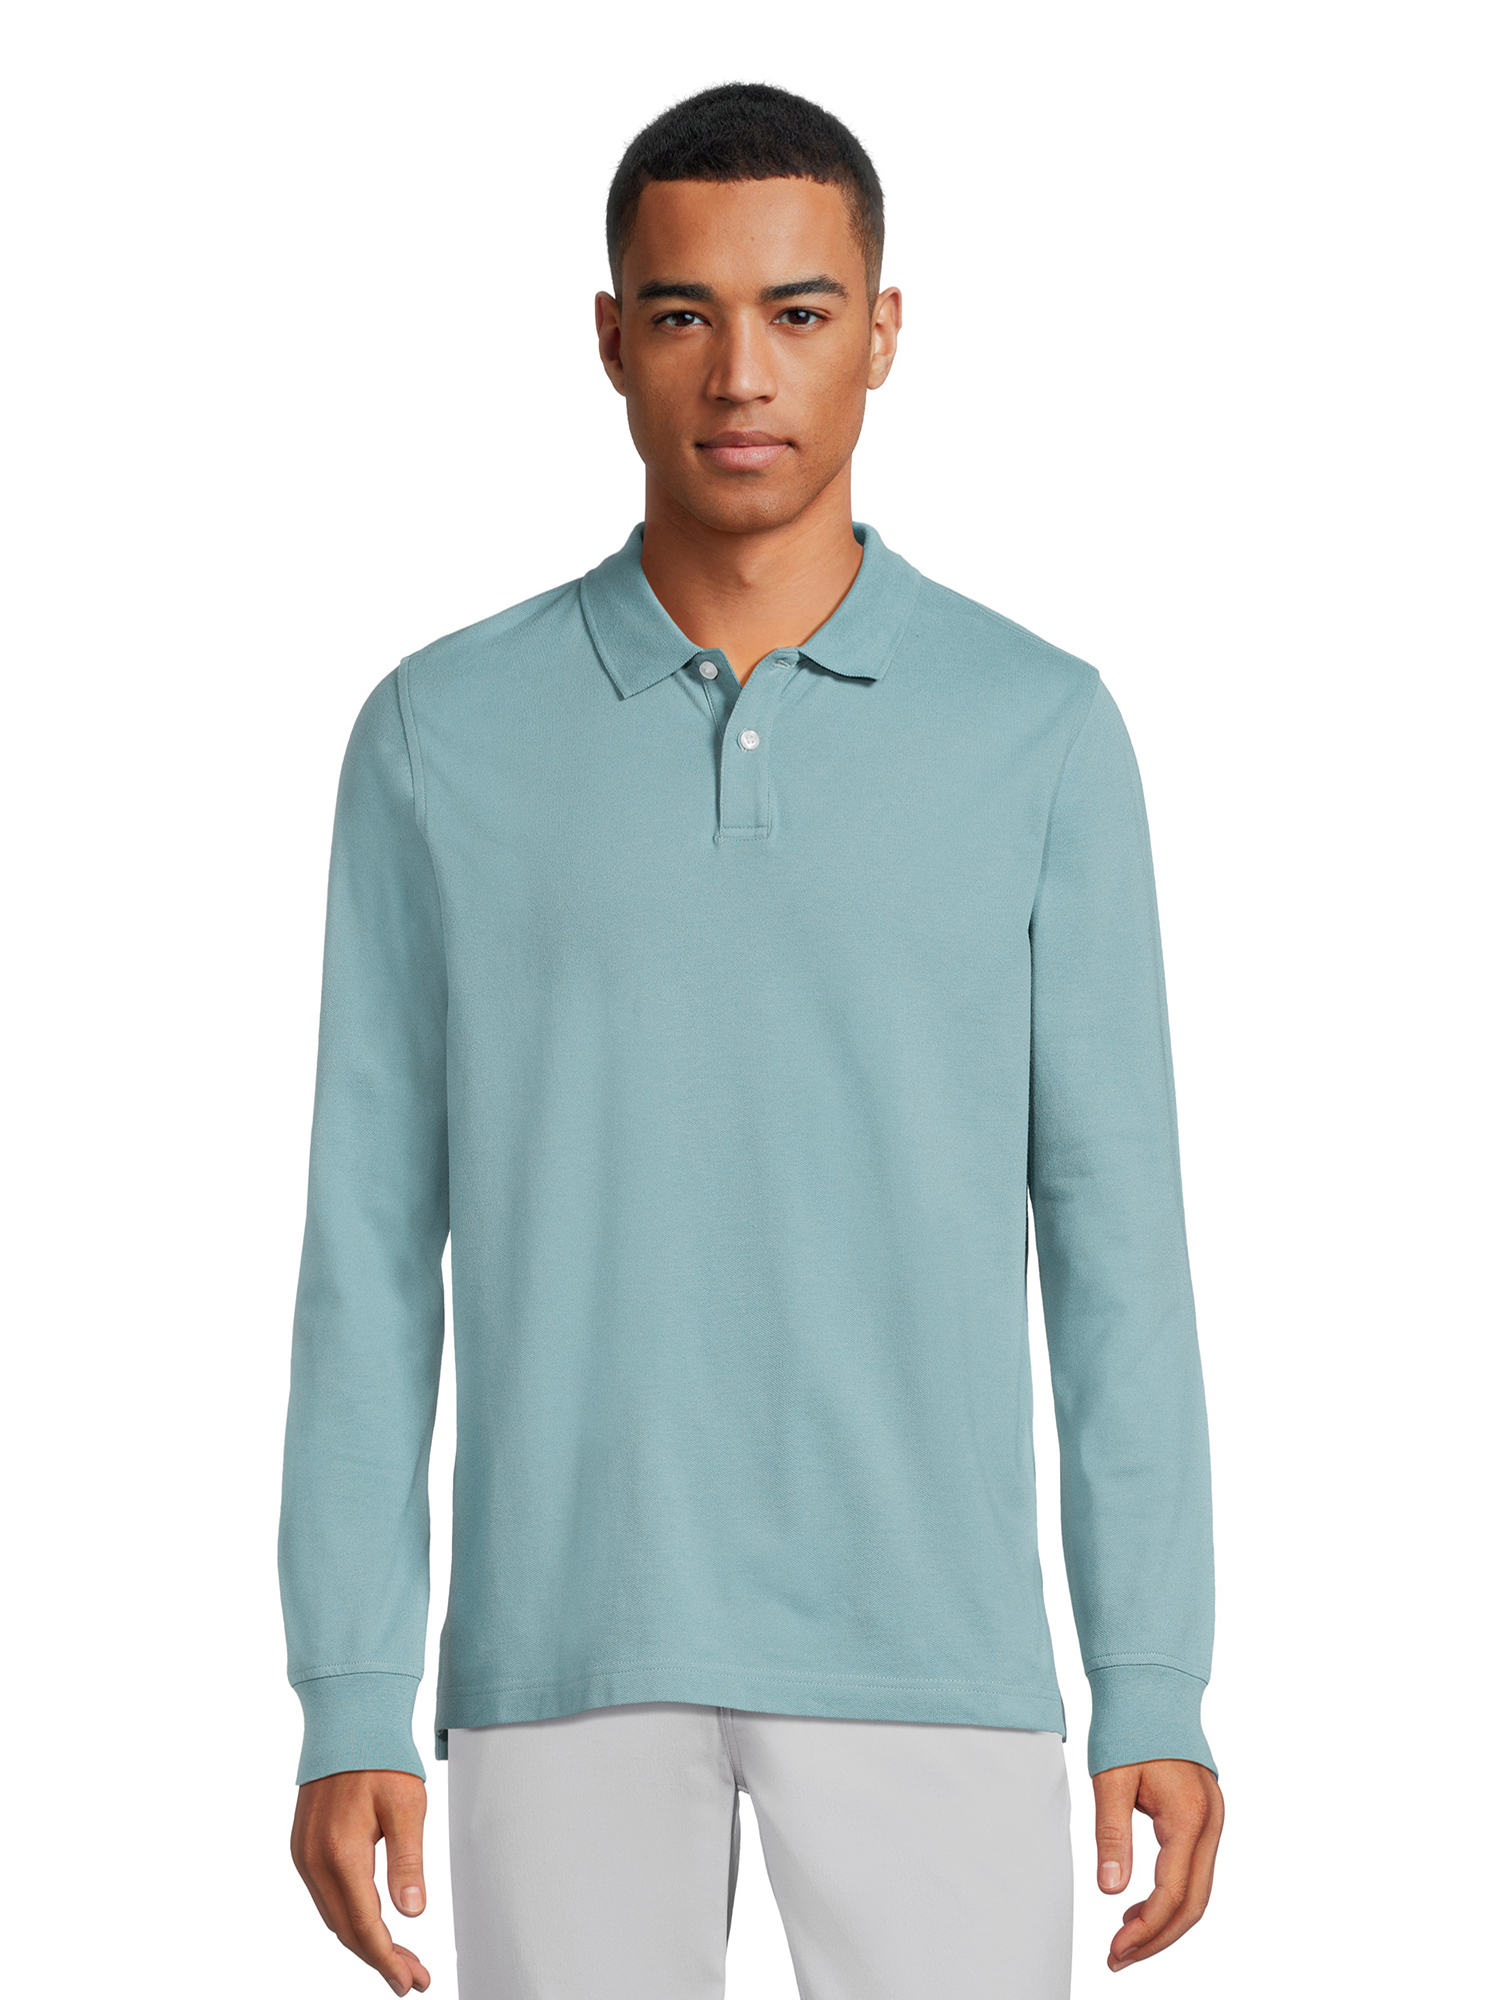 George Men's Pique Polo Shirt with Long Sleeves, Sizes S-3XL - image 1 of 6